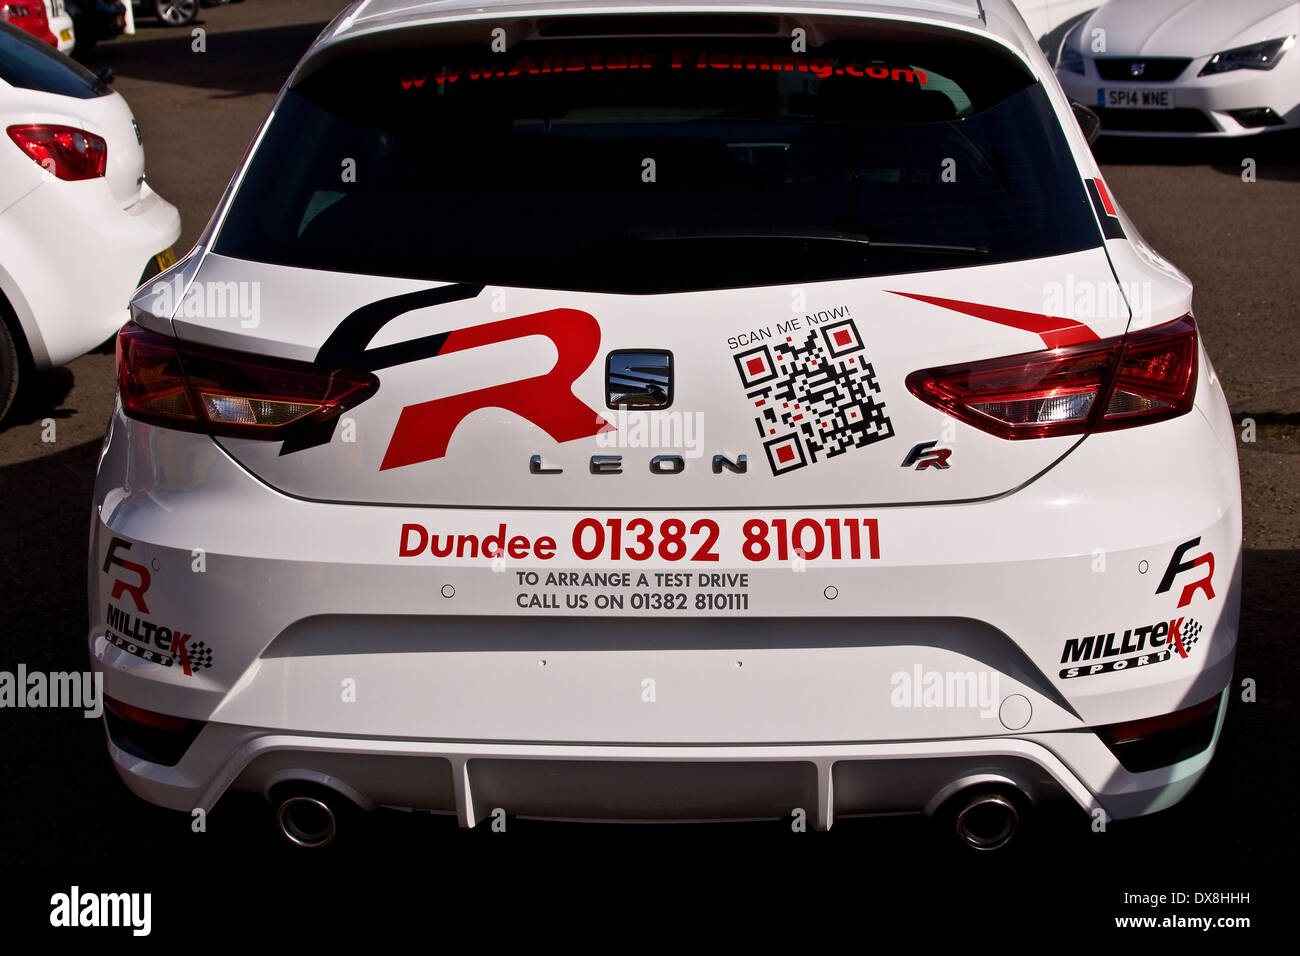 A SEAT-Leon sports car with I-Phone application stickers and adverts outside the Alistair Fleming car showroom in Dundee, UK Stock Photo